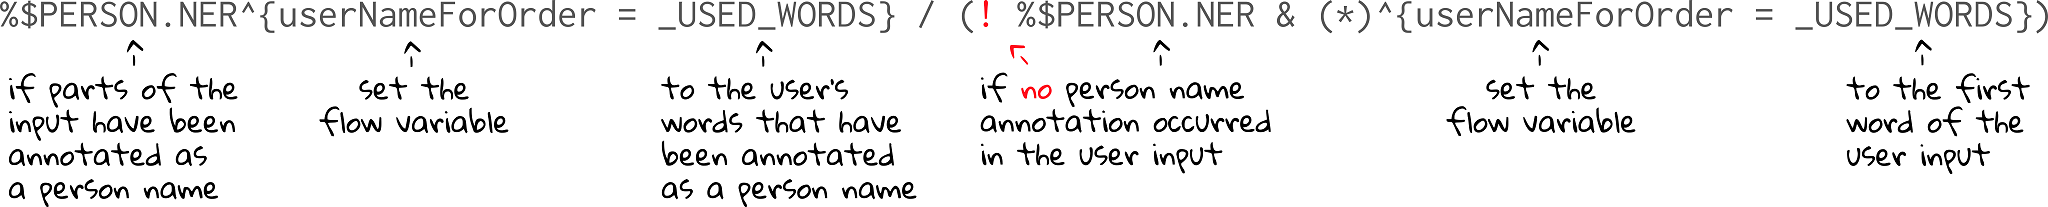 Use person annotation in combination with used words